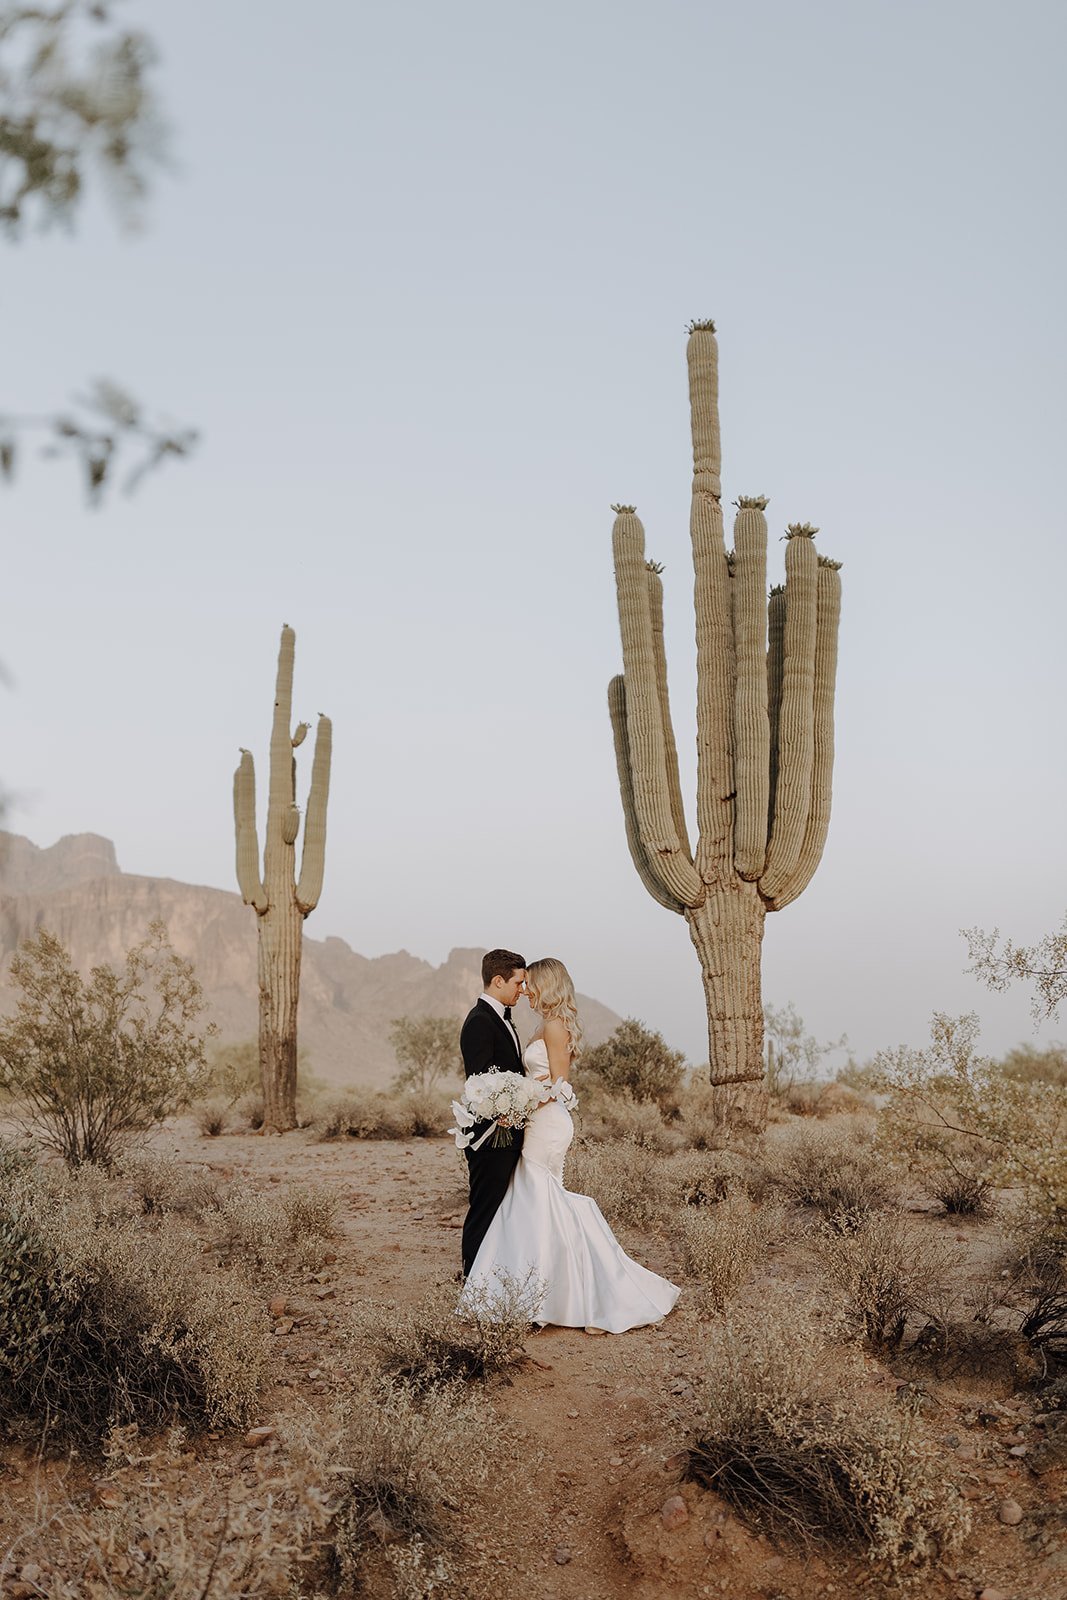 Bride and groom standing forehead to forehead in front of a cactus in the Arizona desert